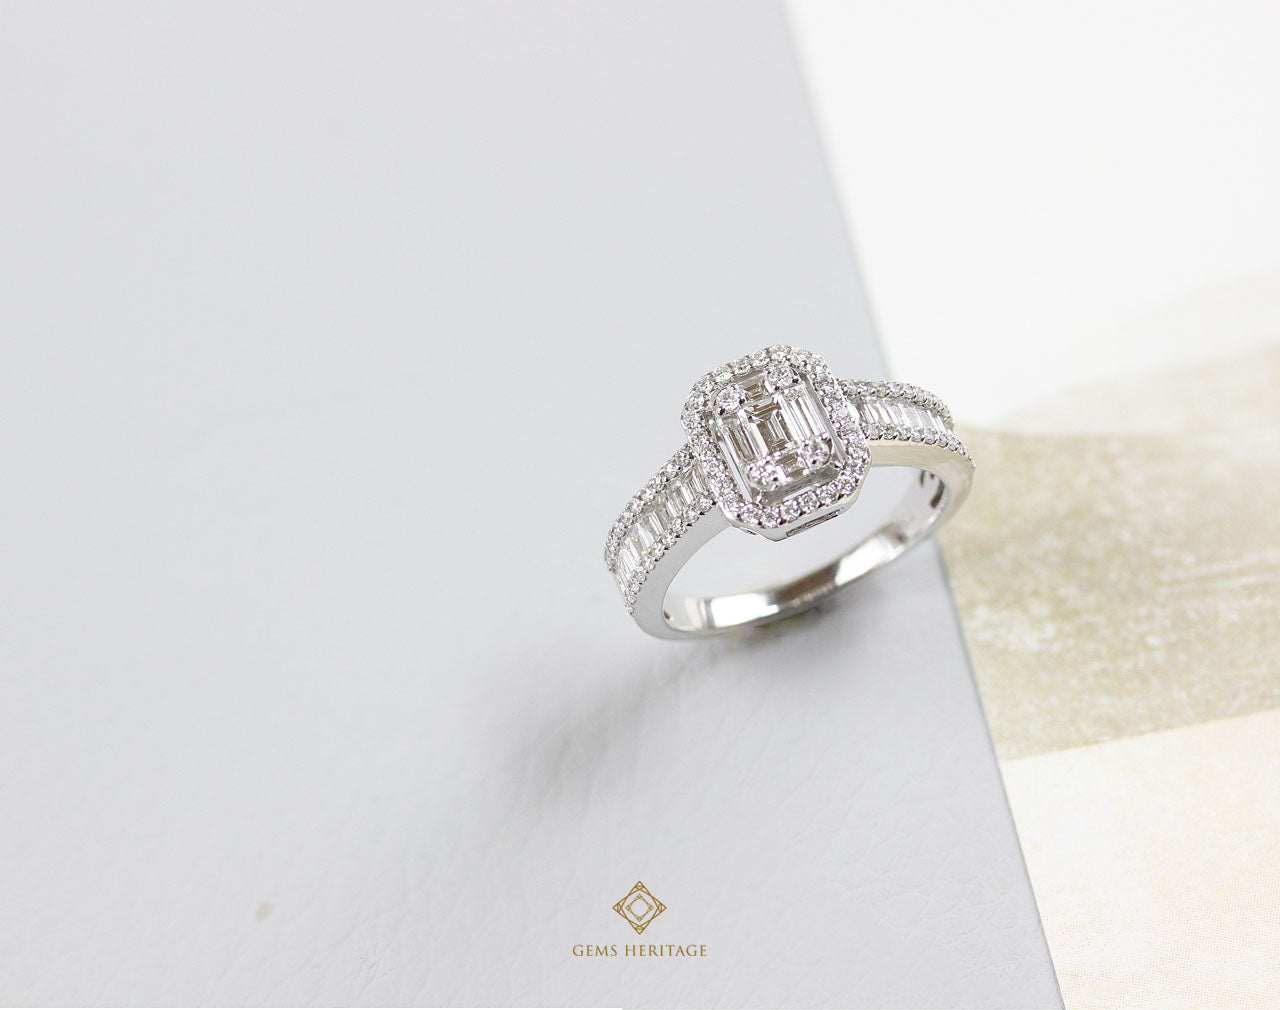 Emerald cut with baguette shank diamond ring (rwg267)